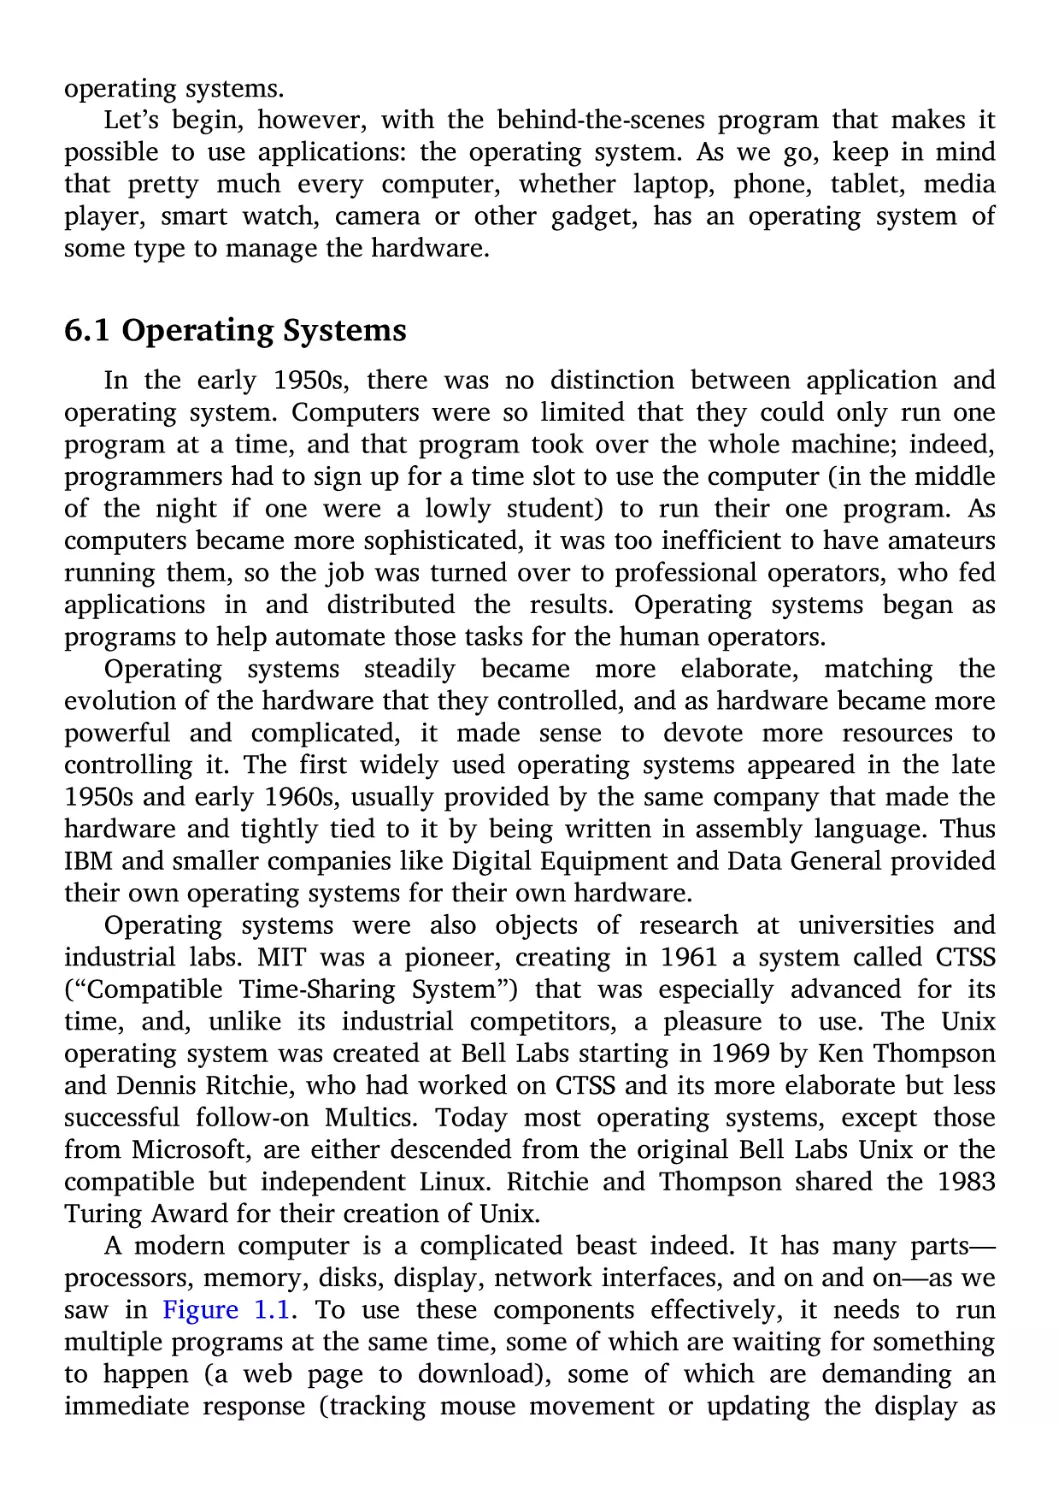 6.1 Operating Systems